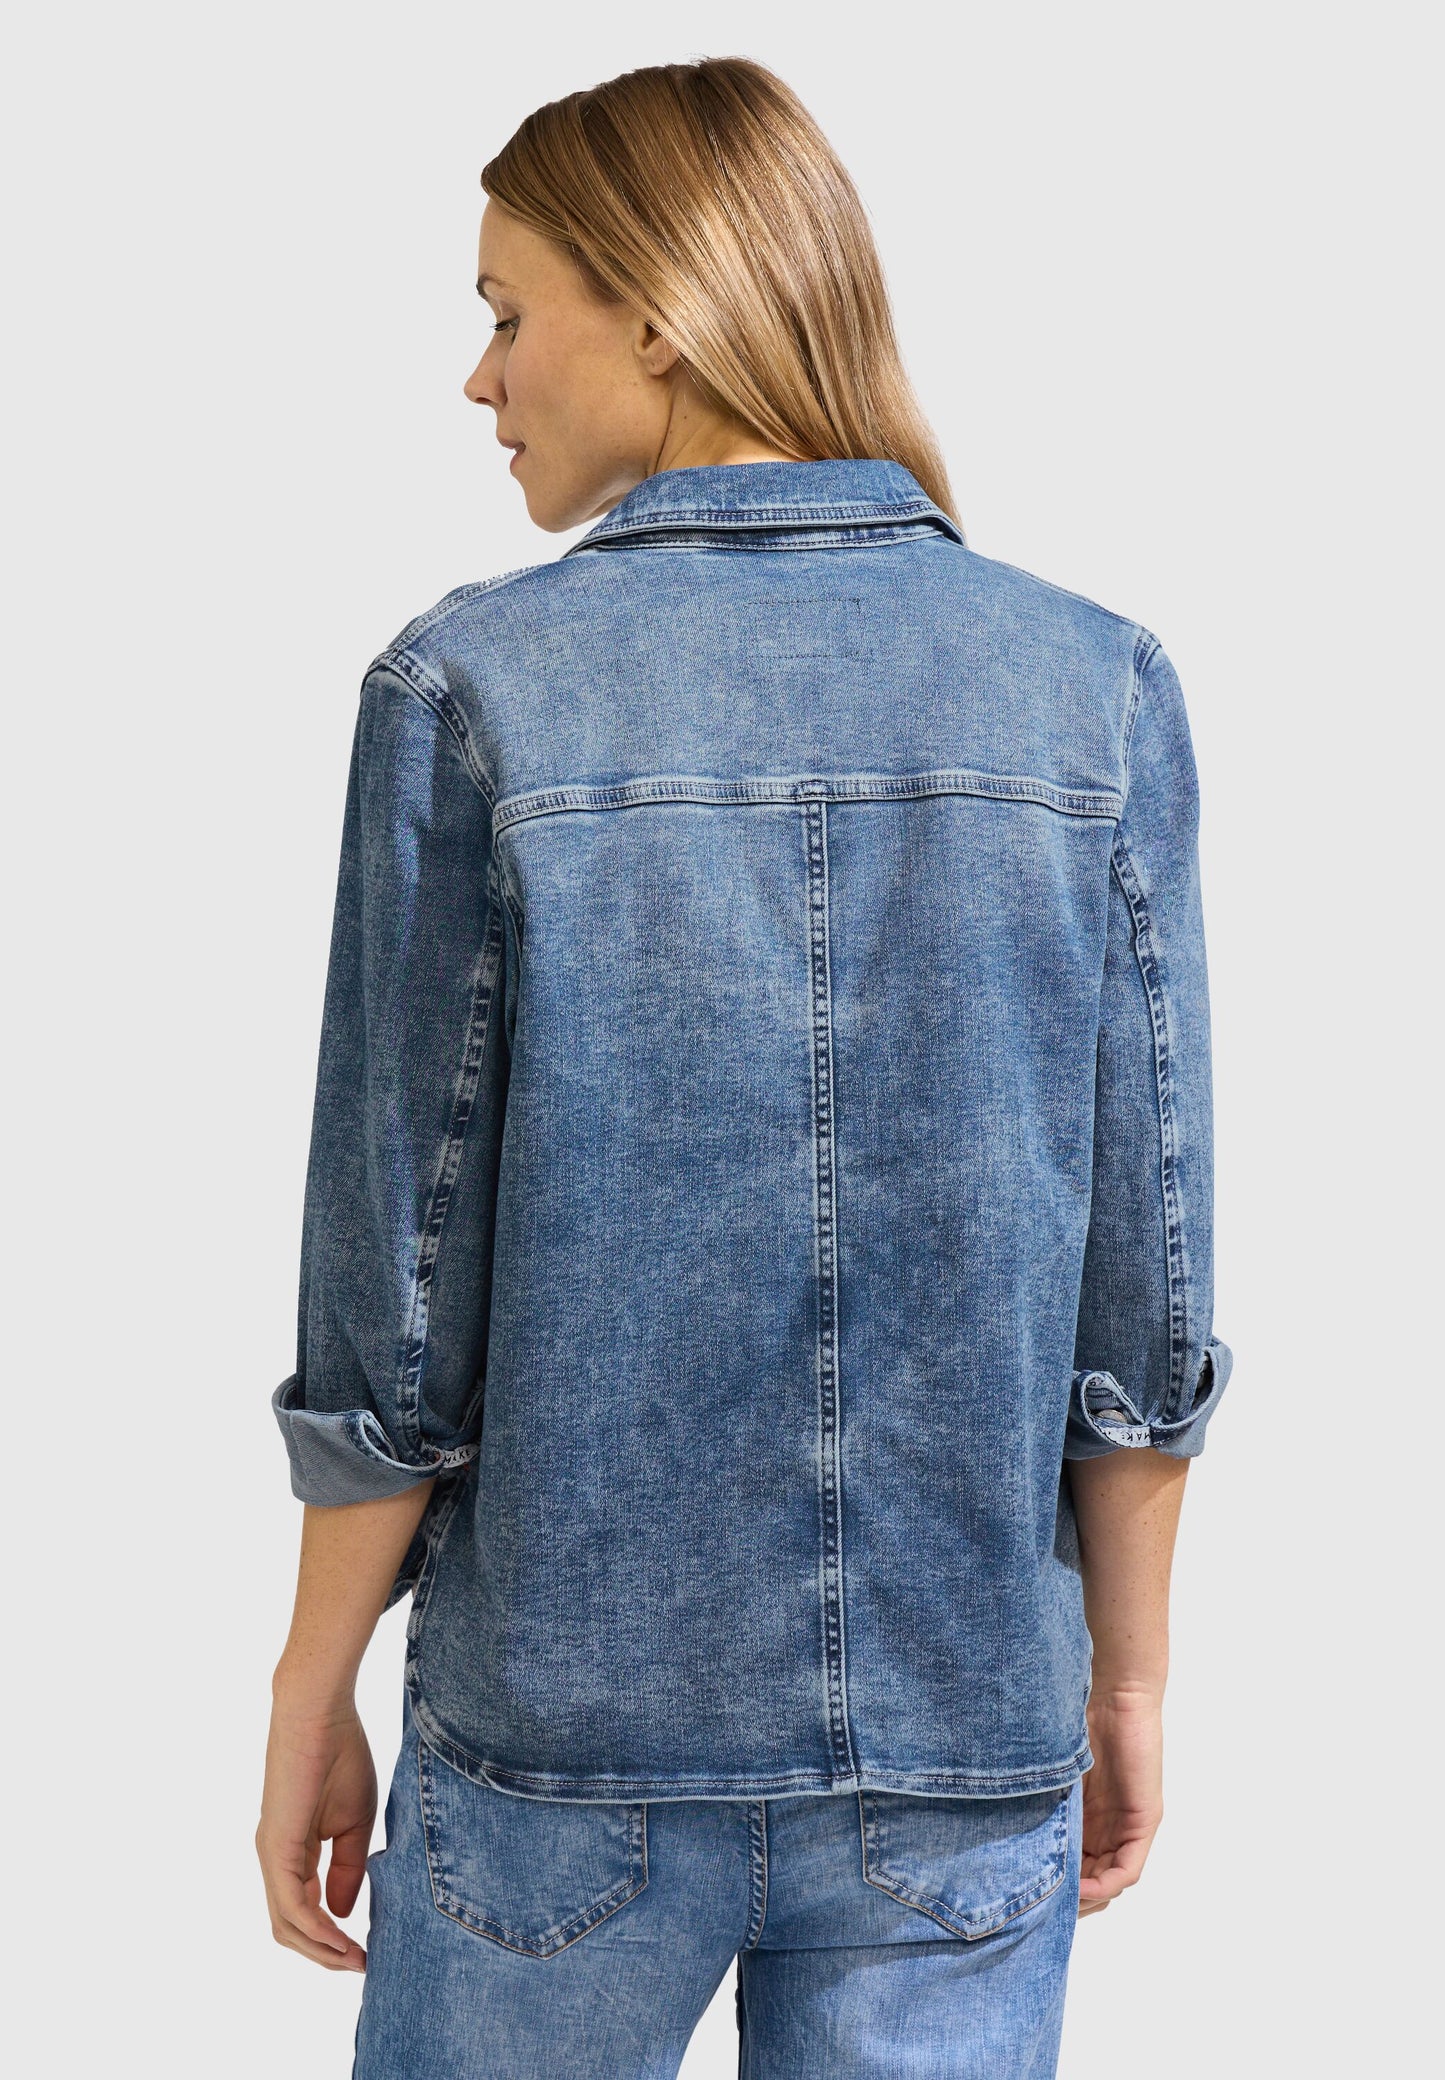 CECIL - Jeans Overshirt - mid blue wash